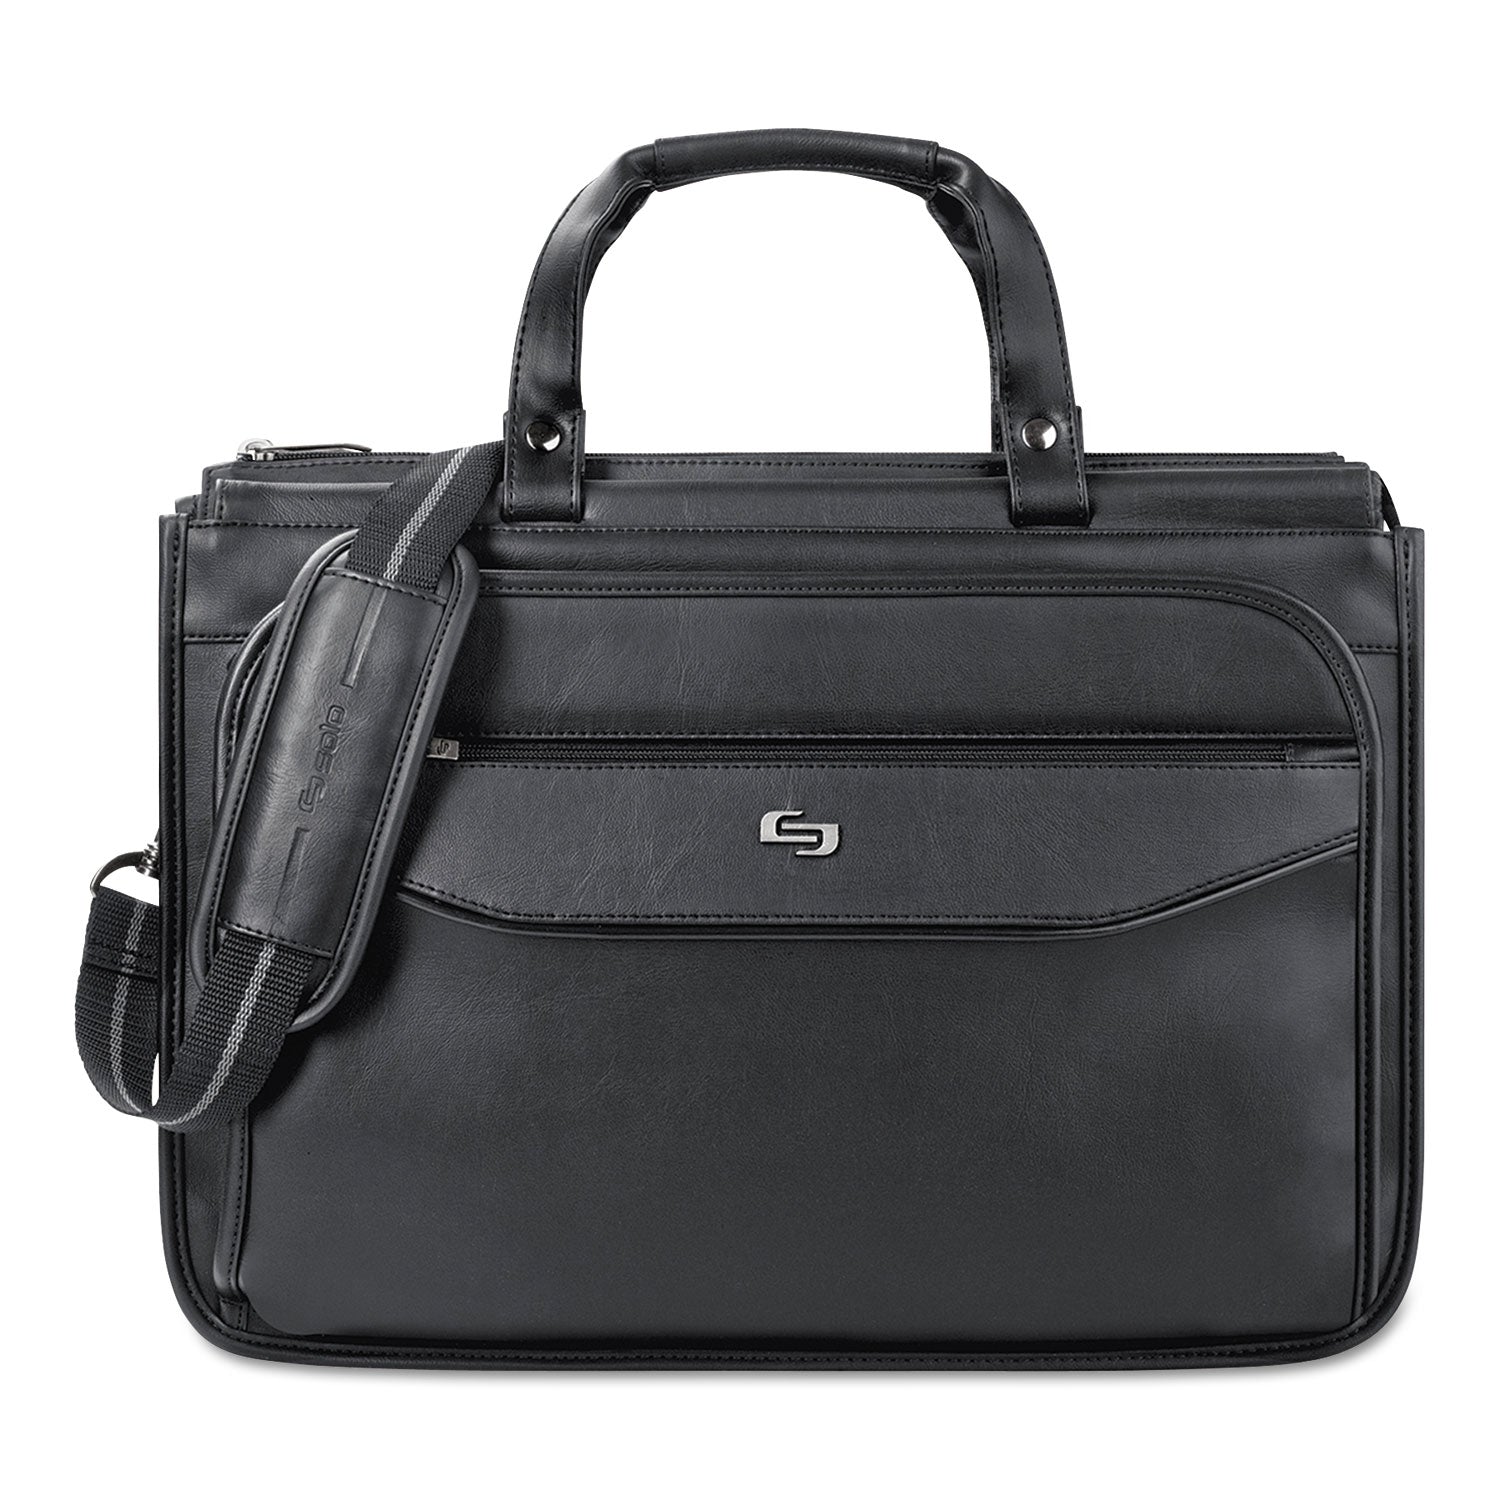 Harrison Briefcase, Fits Devices Up to 15.6", Vinyl, 16.75 x 7.75 x 12, Black - 